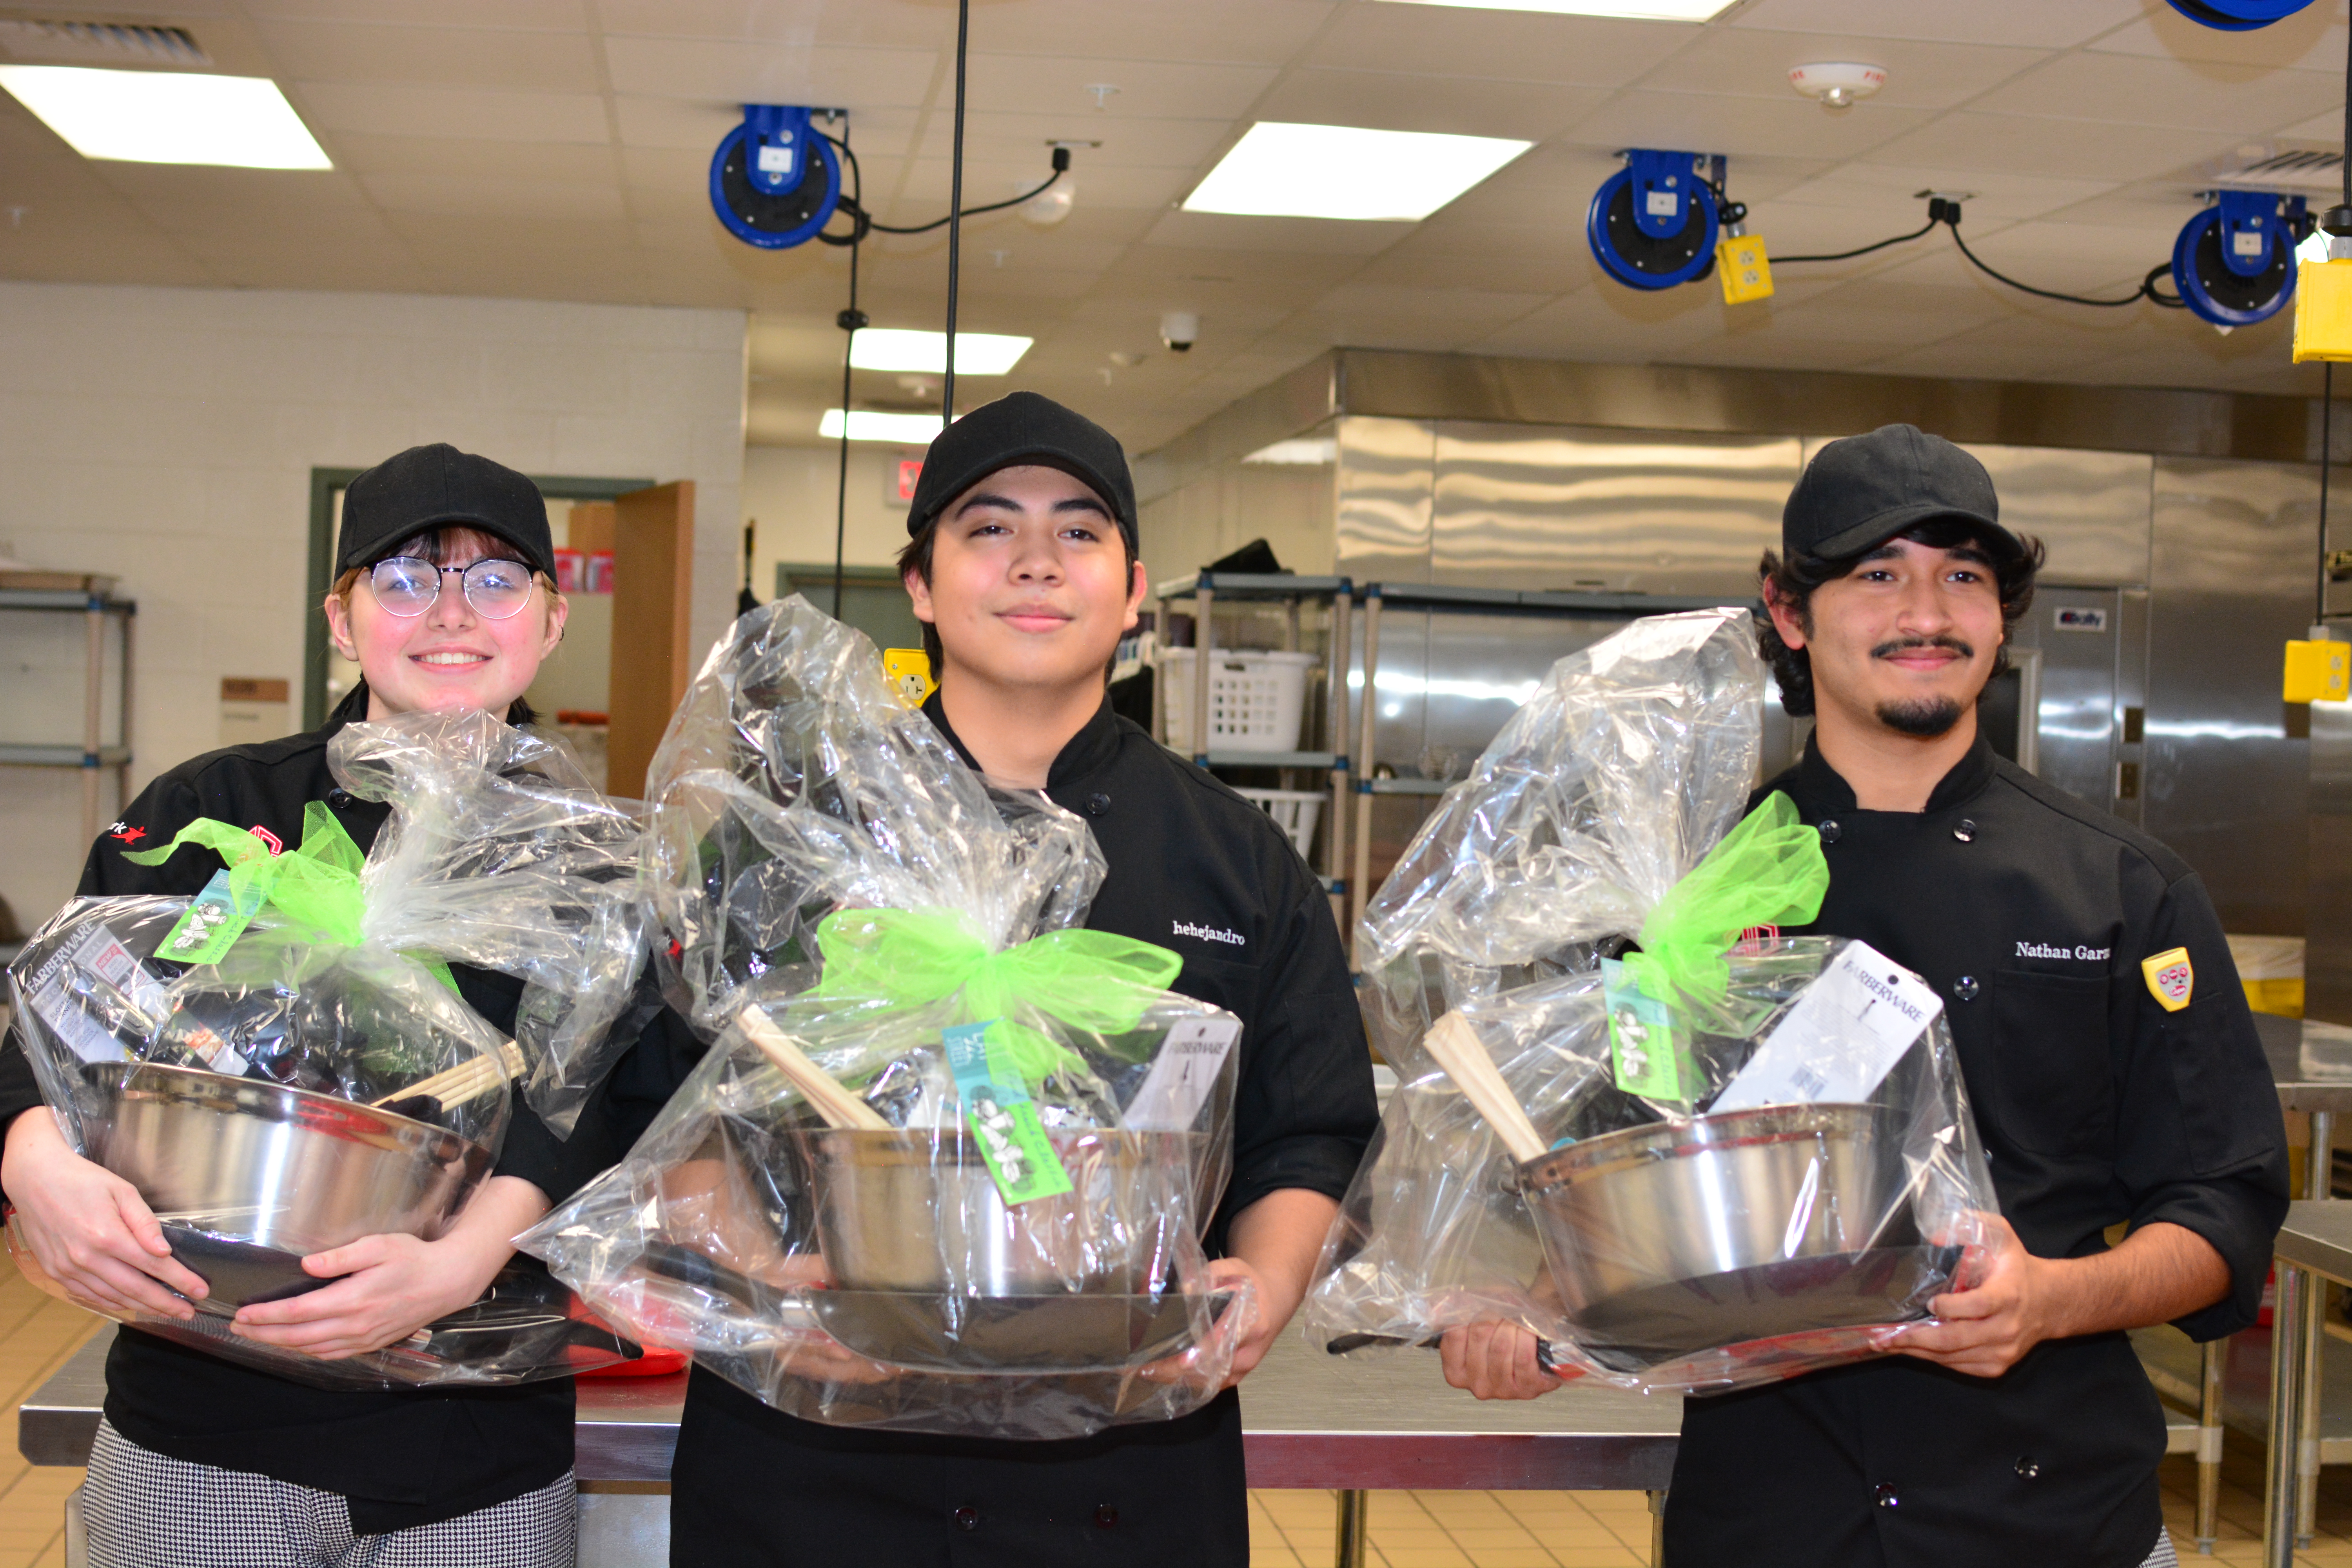 culinary students pose with gift baskets